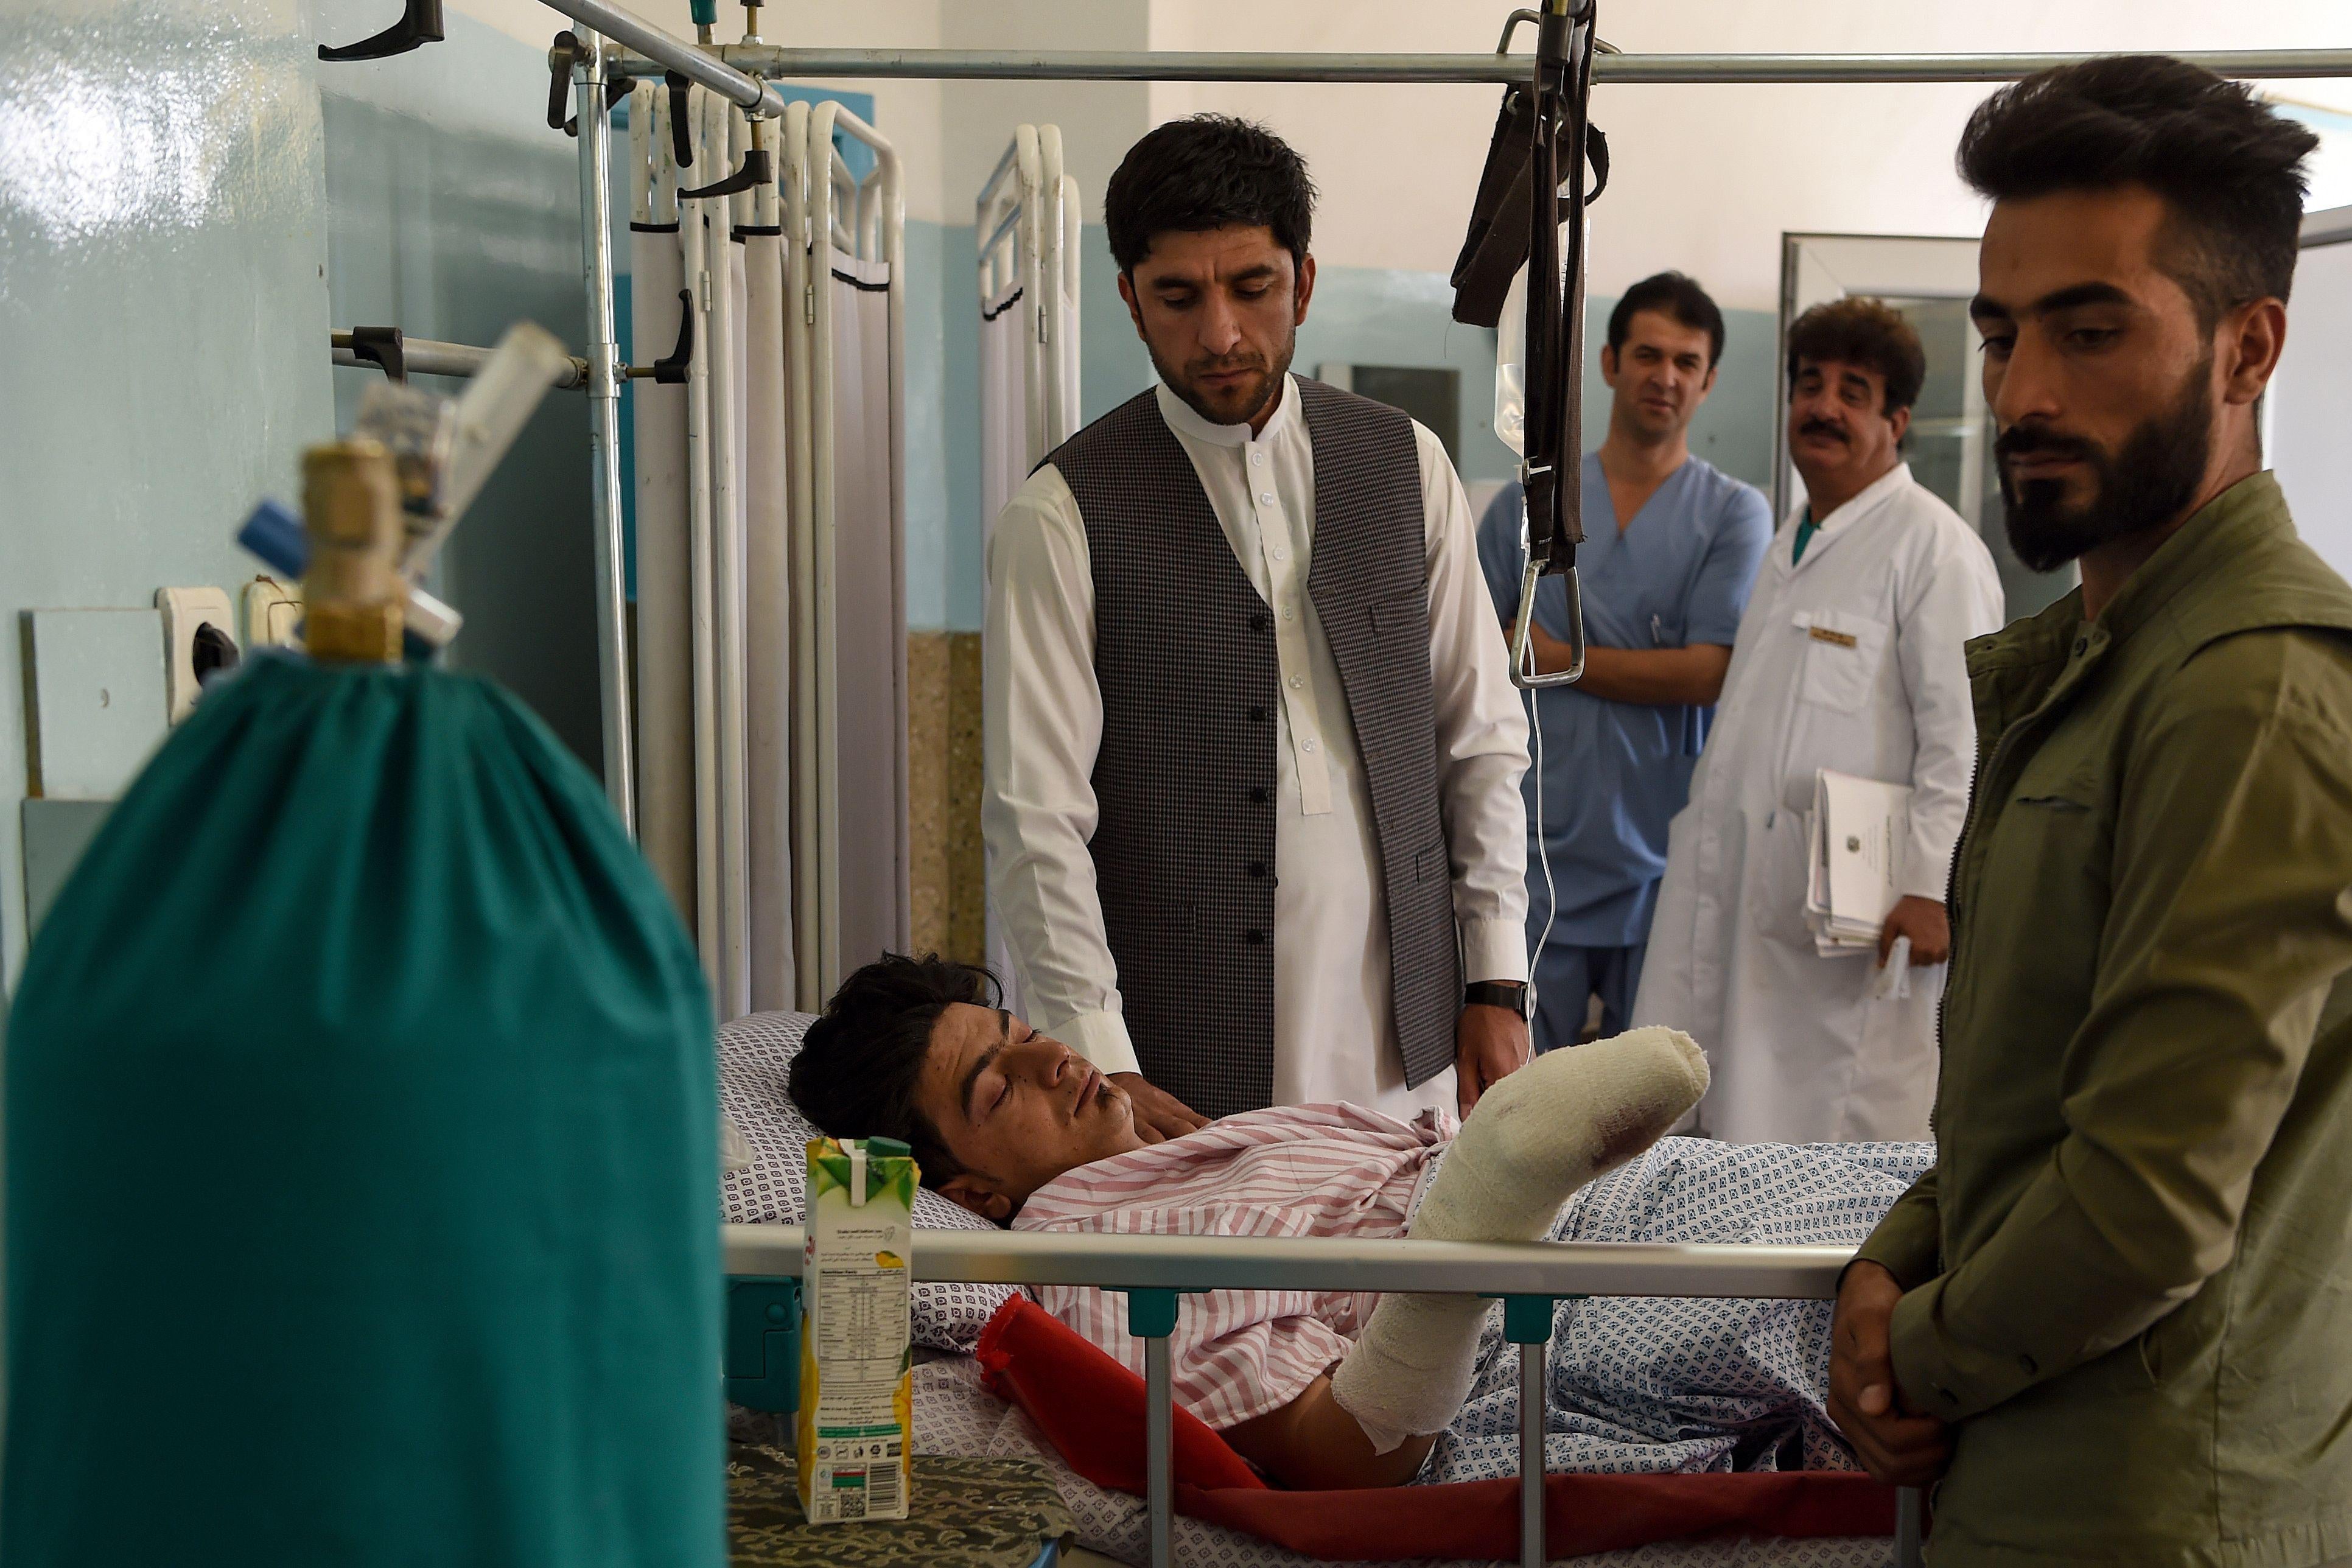 A wounded man receives treatment as people gather around him at the Wazir Akbar Khan hospital after a deadly bomb blast in a wedding hall in Kabul on August 18, 2019. 